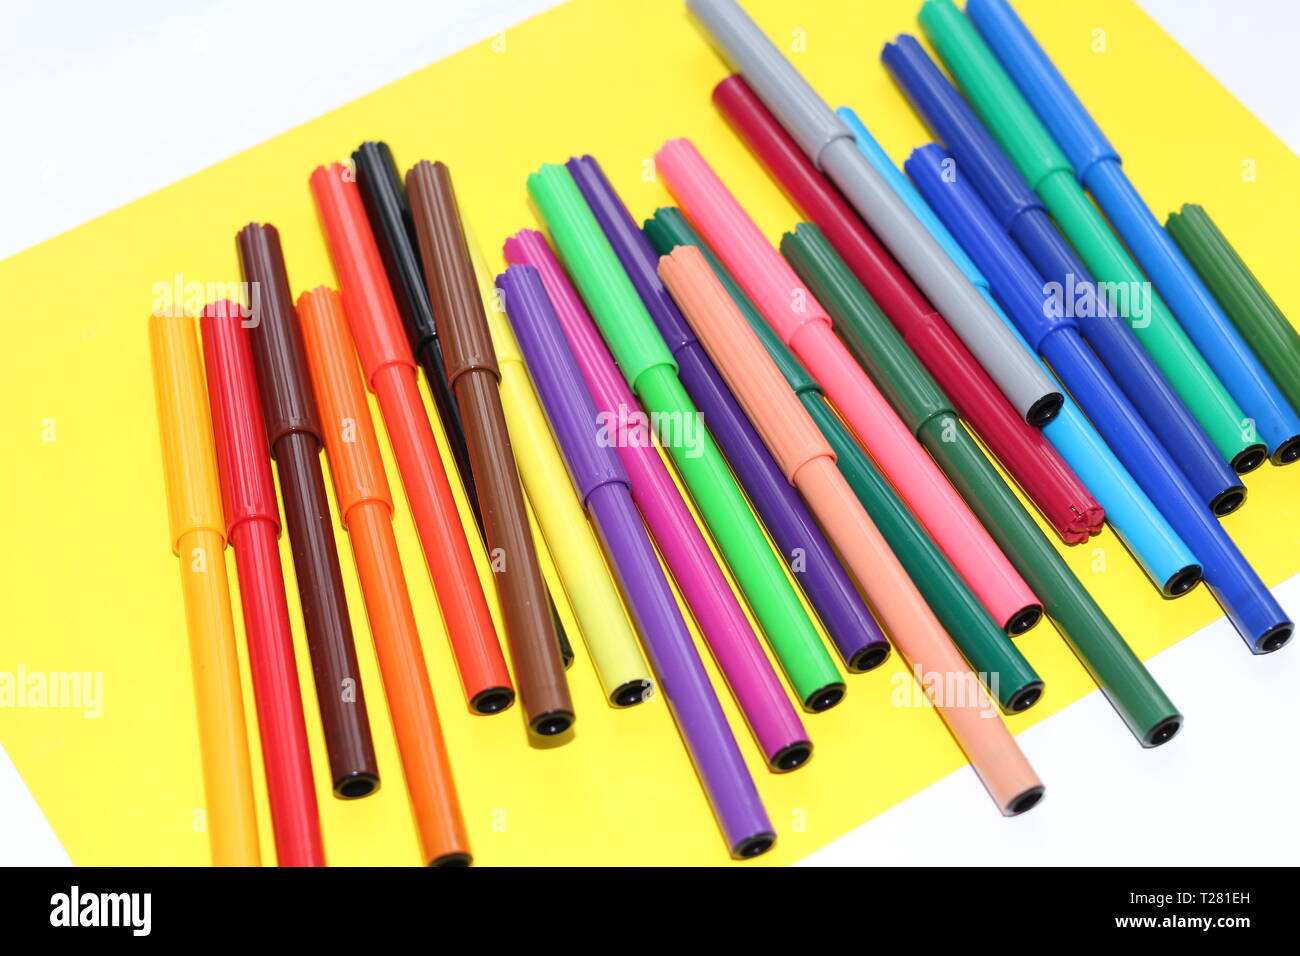 https://c8.alamy.com/comp/T281EH/markers-are-scattered-on-the-table-multi-color-markers-for-drawing-draw-children-schoolchildren-students-and-office-workers-T281EH.jpg